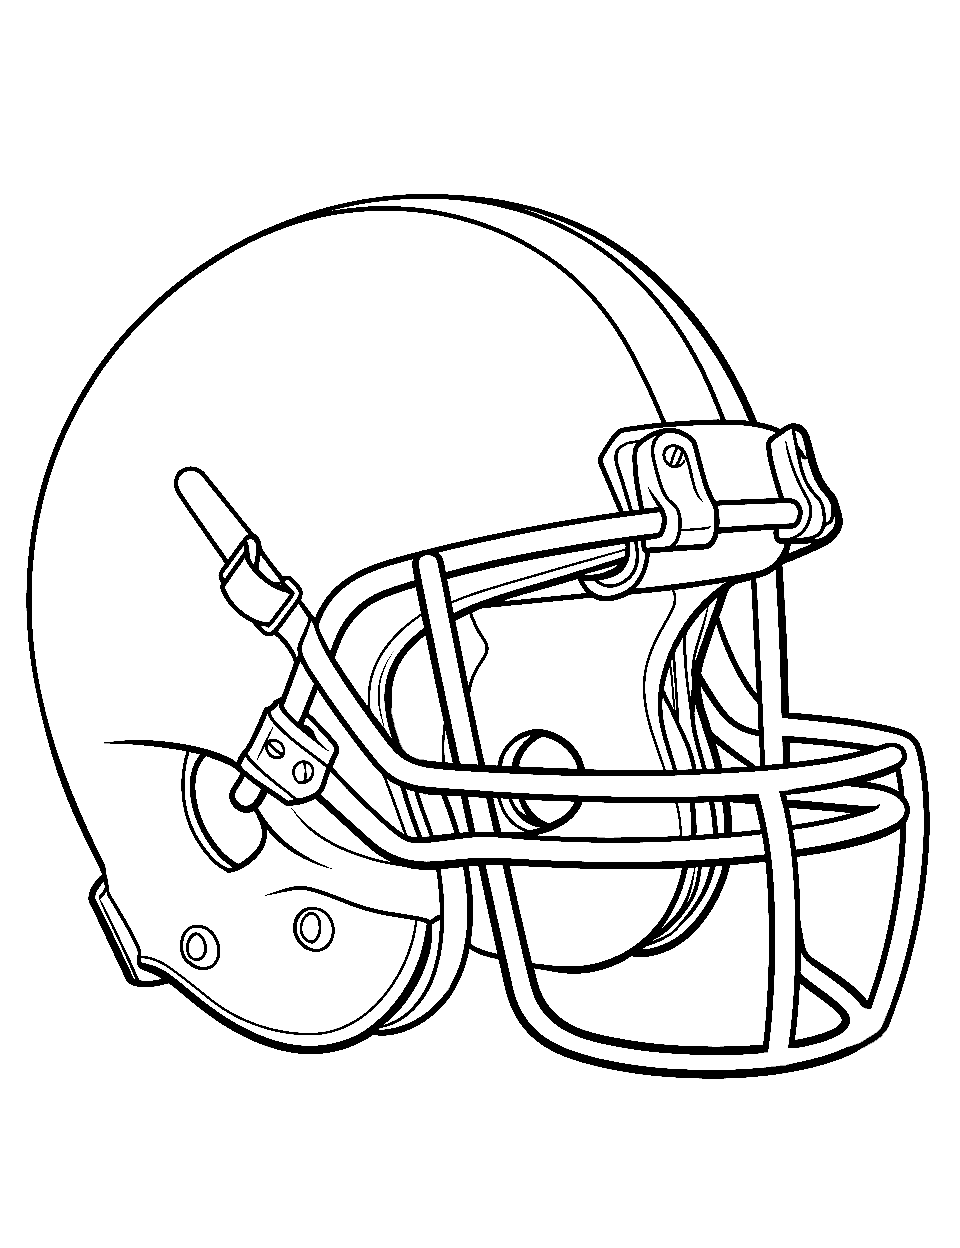 Team Helmet Coloring Page - An unbranded helmet for anyone to add their favorite team logo and color.